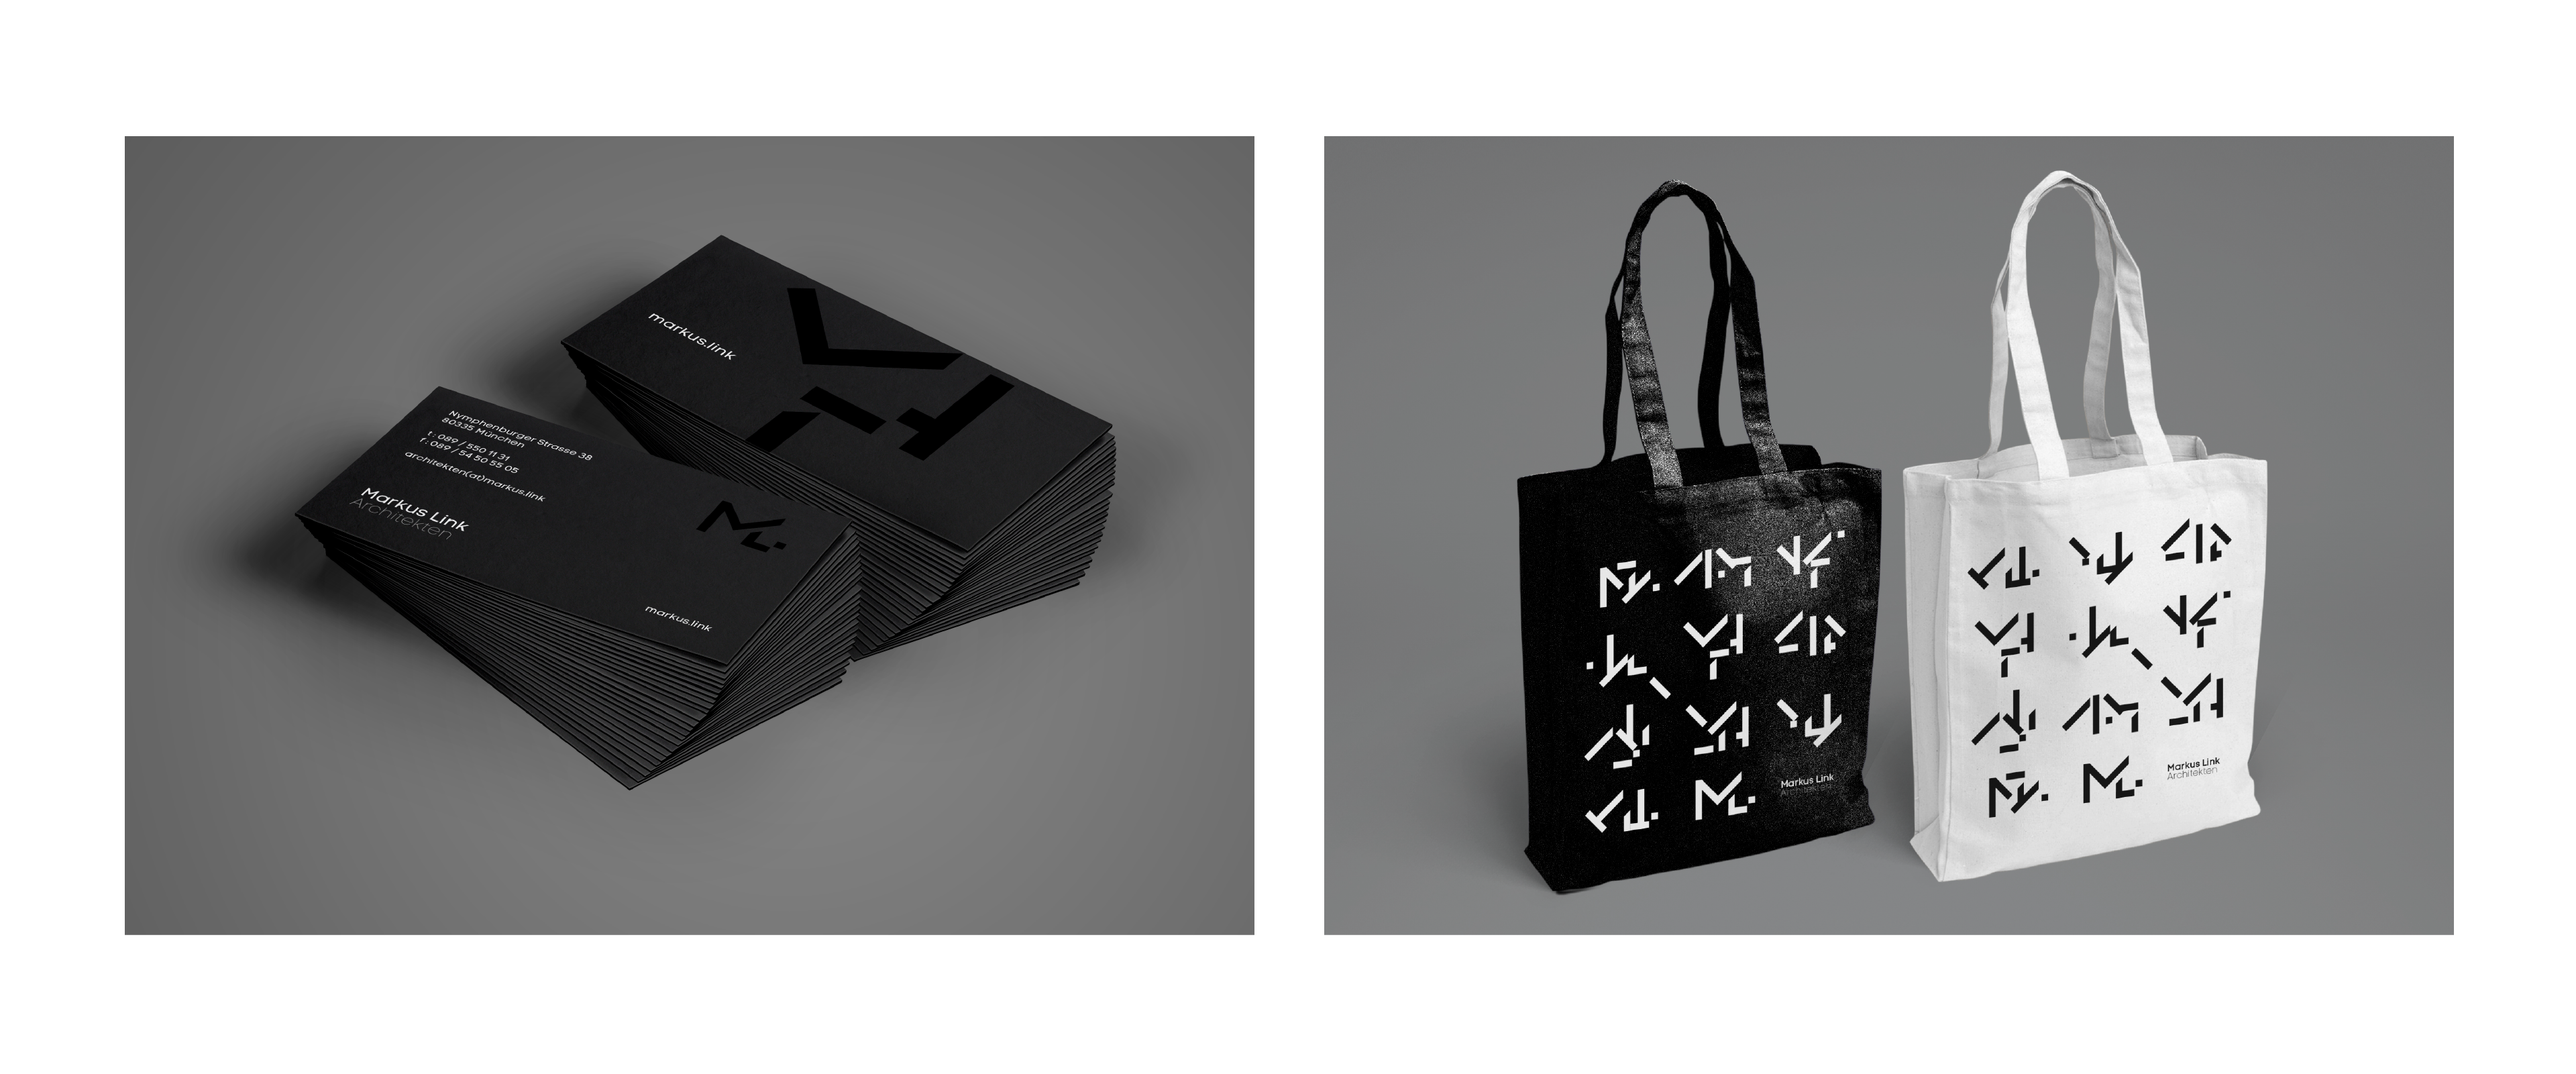 Markus Link business cards and tote bags